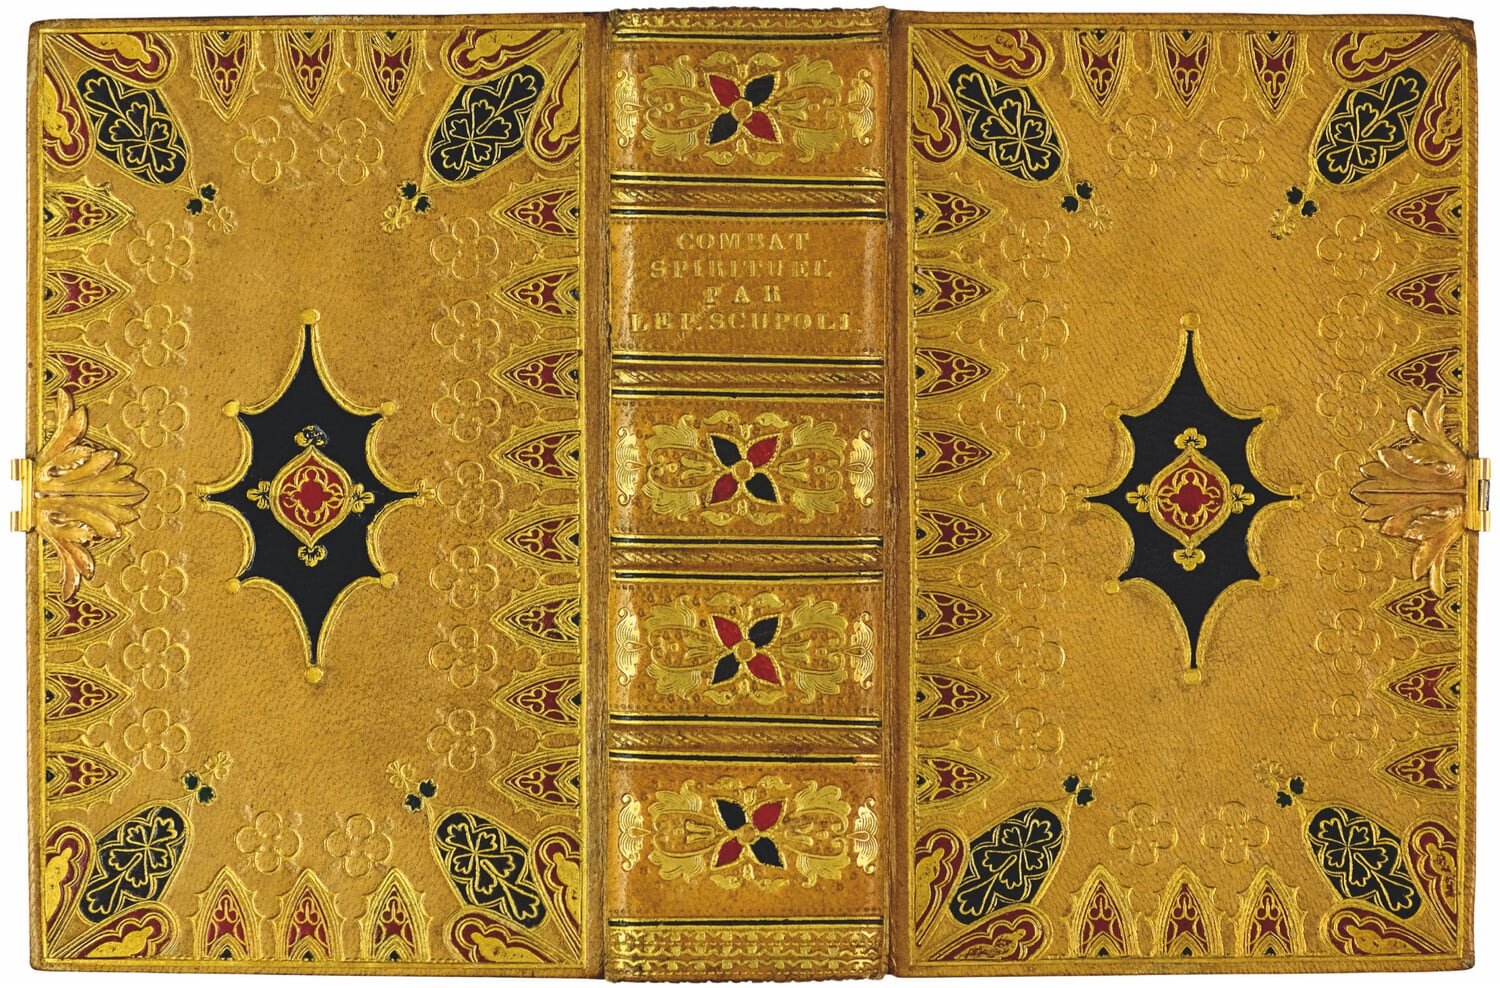  Unusual is the ogival border on the binding for Lorenzo Scupoli's  Le combat spirituel  [no. 554], created by the Viennese bookbinder Joseph Drechsler. 